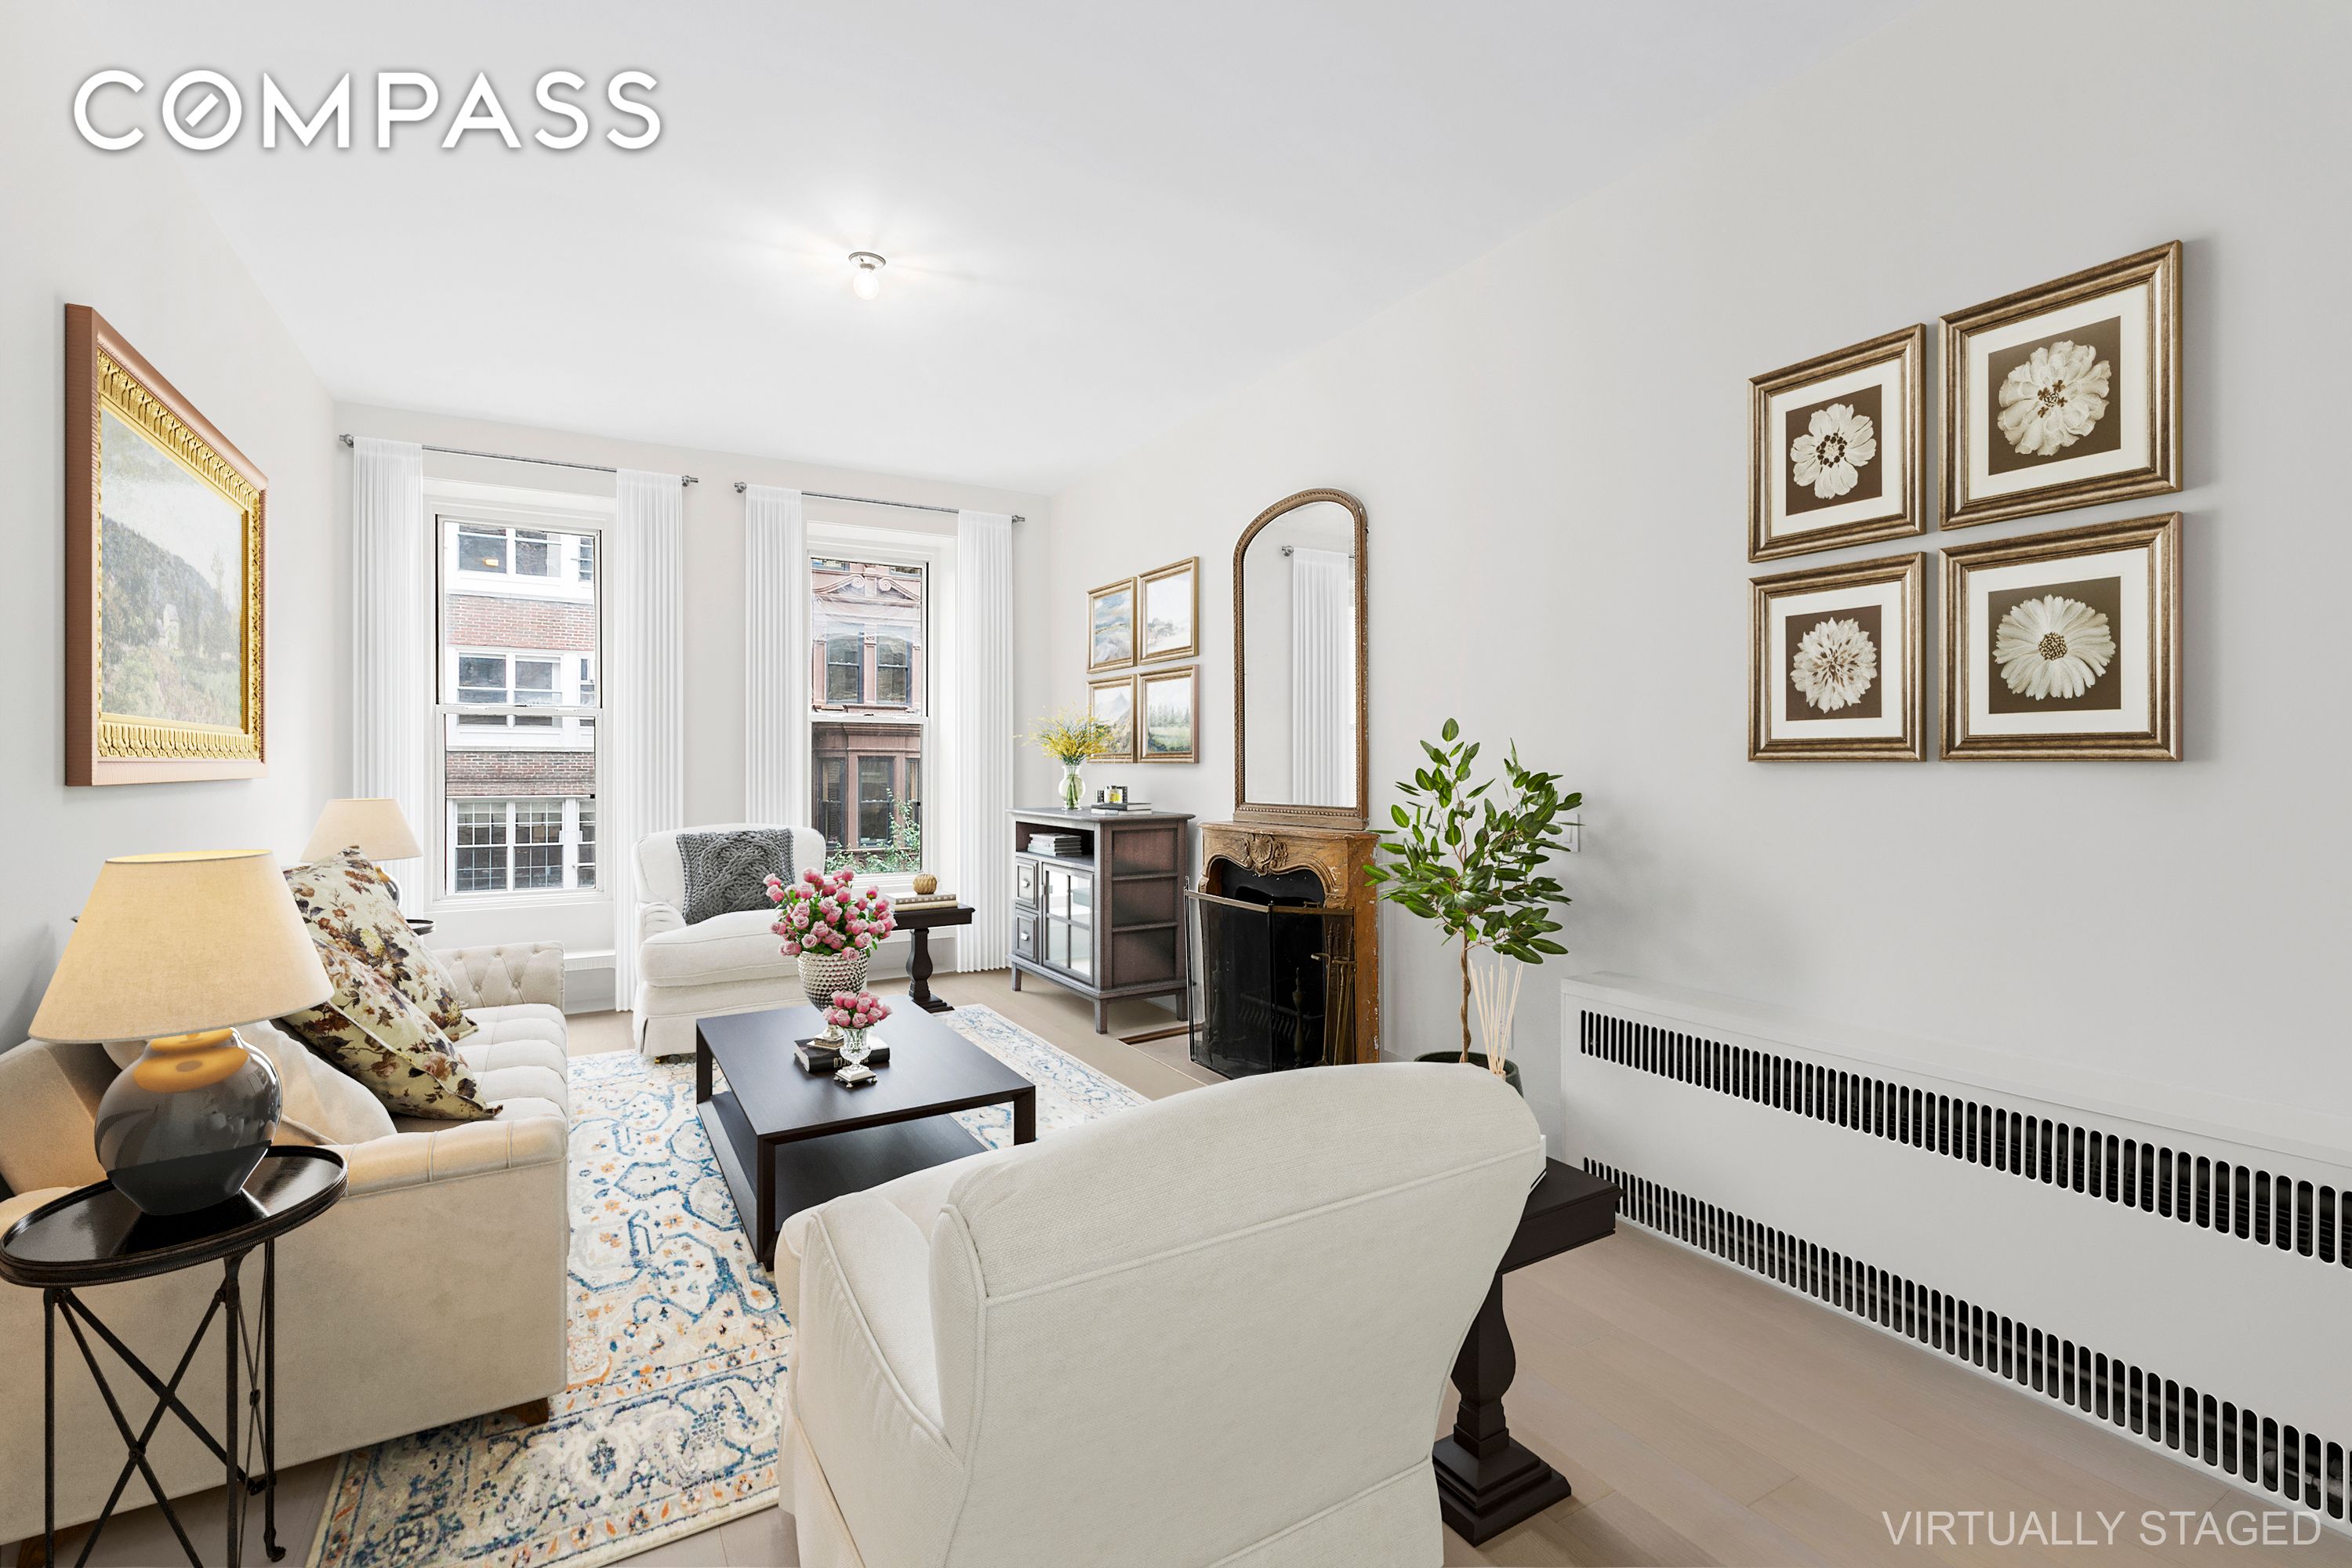 55 East 76th Street Six, Lenox Hill, Upper East Side, NYC - 3 Bedrooms  
2 Bathrooms  
8 Rooms - 